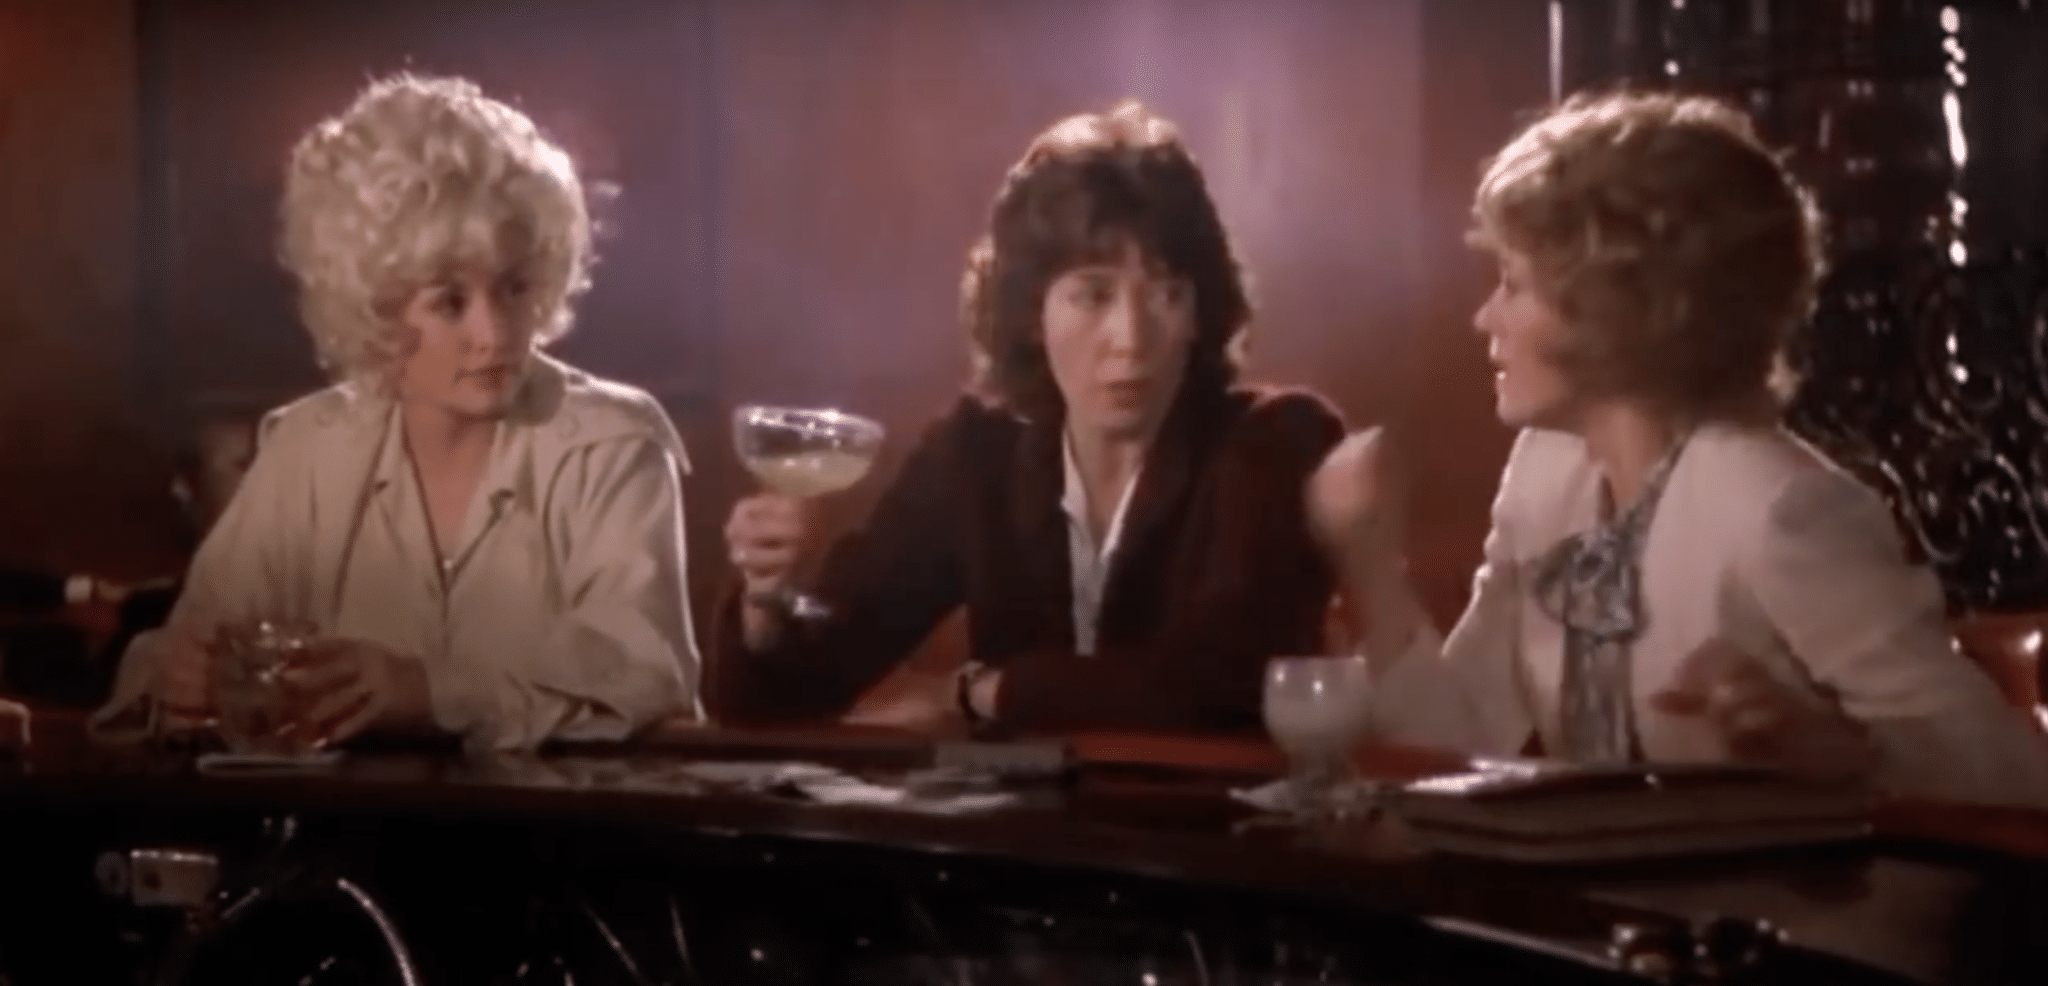 Dolly Parton, Lily Tomlin and Jane Fonda in 9 to 5